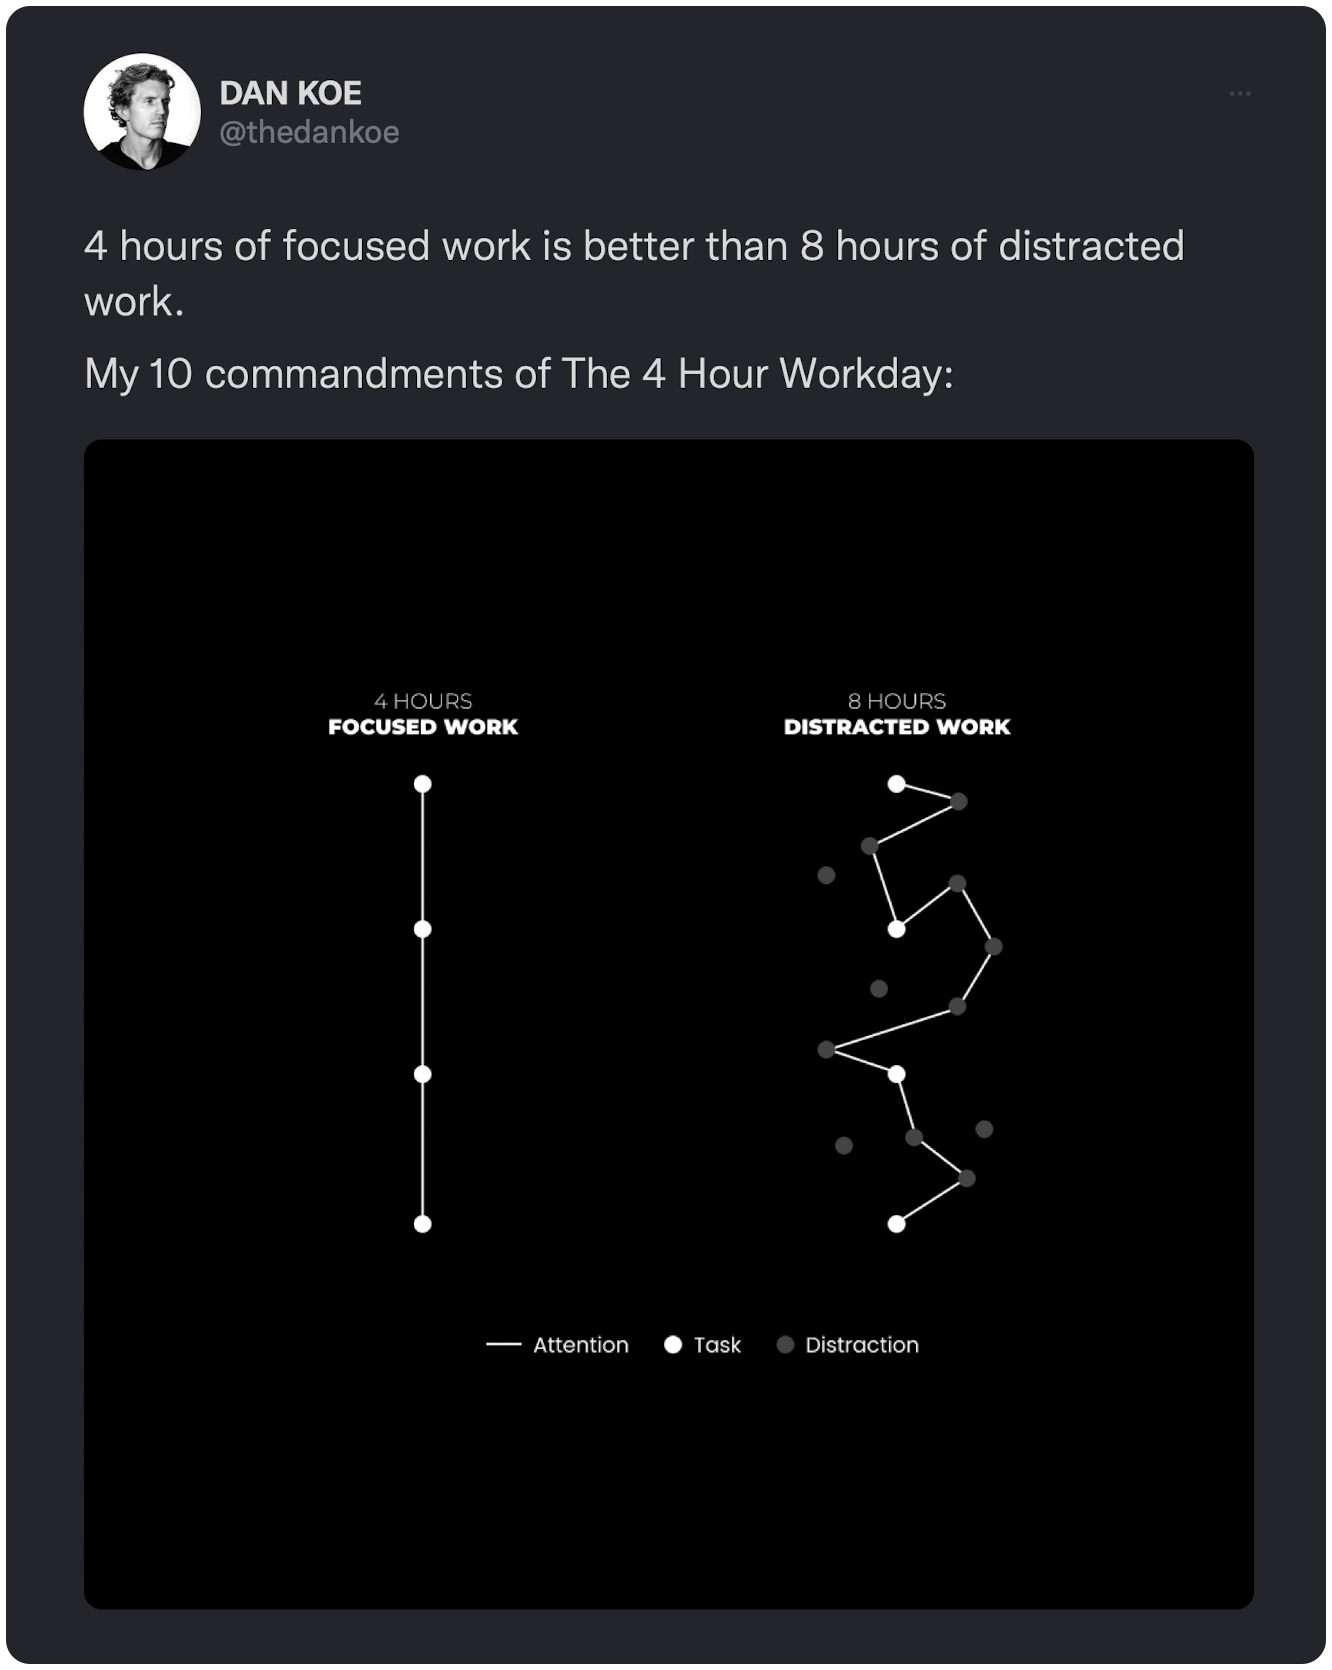 4 hours of focused work is better than 8 hours of distracted work. My 10 commandments of The 4 Hour Workday